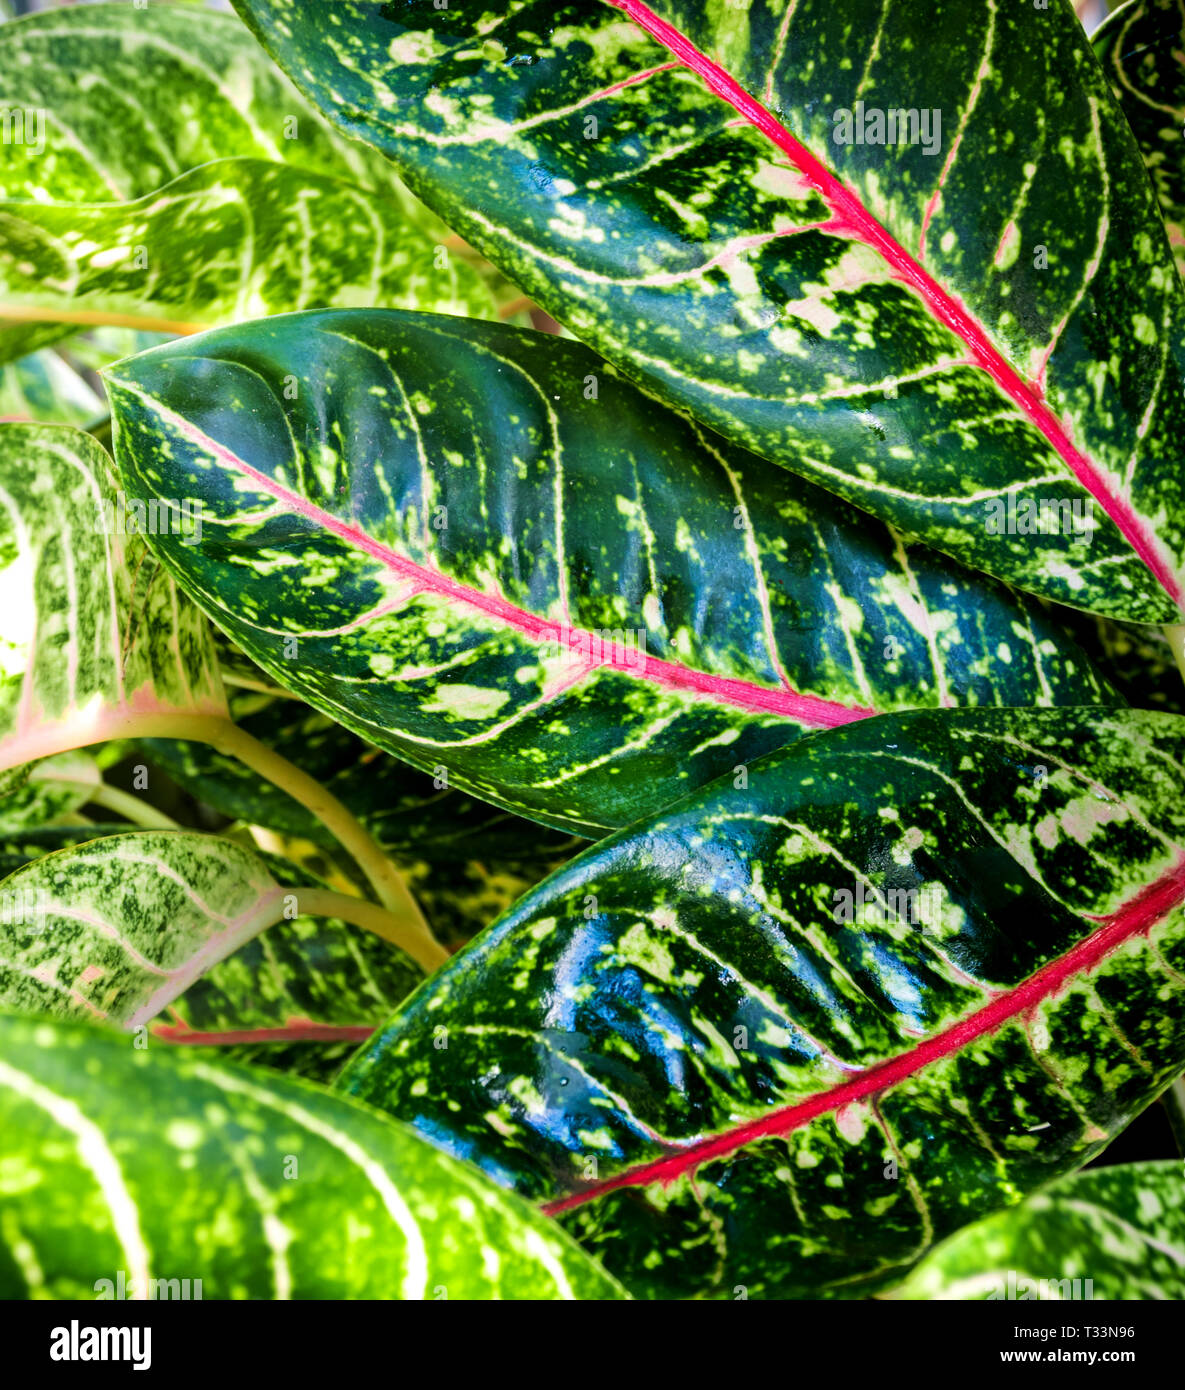 Close-up to detail vivid pink and green color on leaf surface of Aglaonema beautiful tropical ornamental houseplant Stock Photo